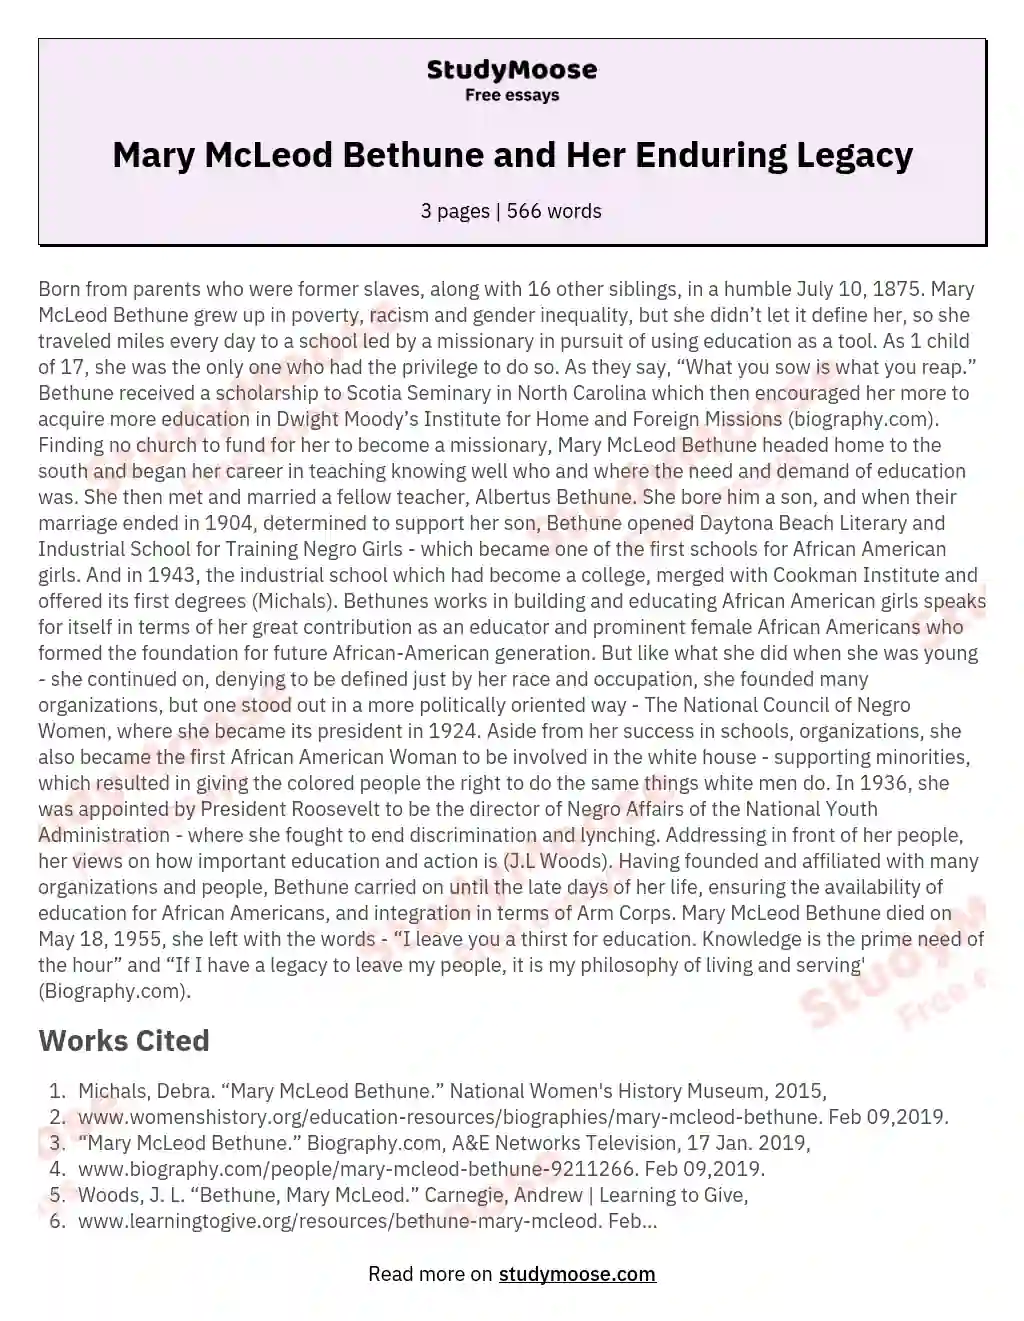 Mary McLeod Bethune and Her Enduring Legacy essay